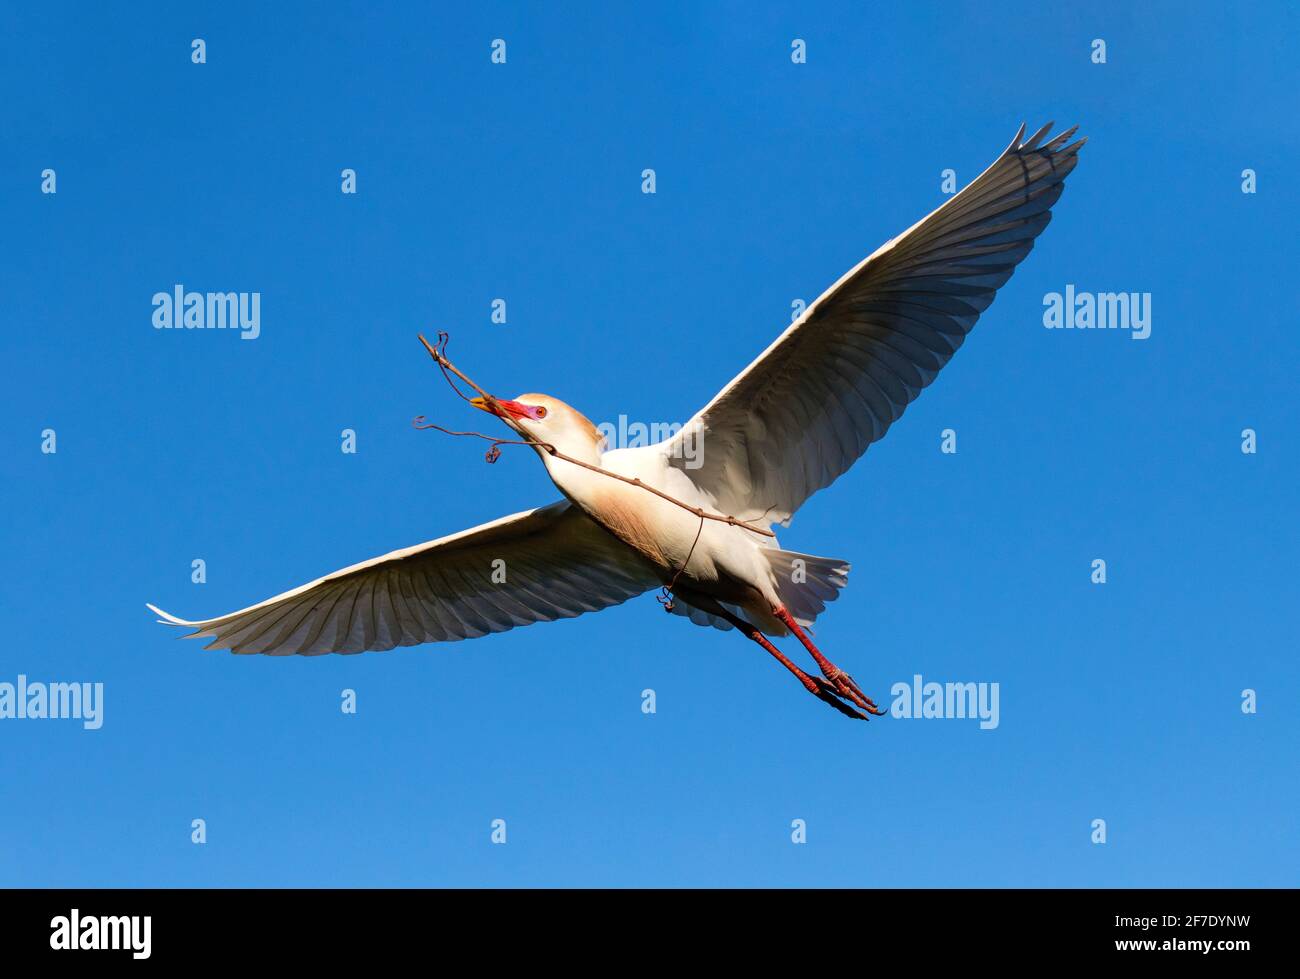 A cattle egret, Bubulcus ibis, flying with nesting material. Stock Photo